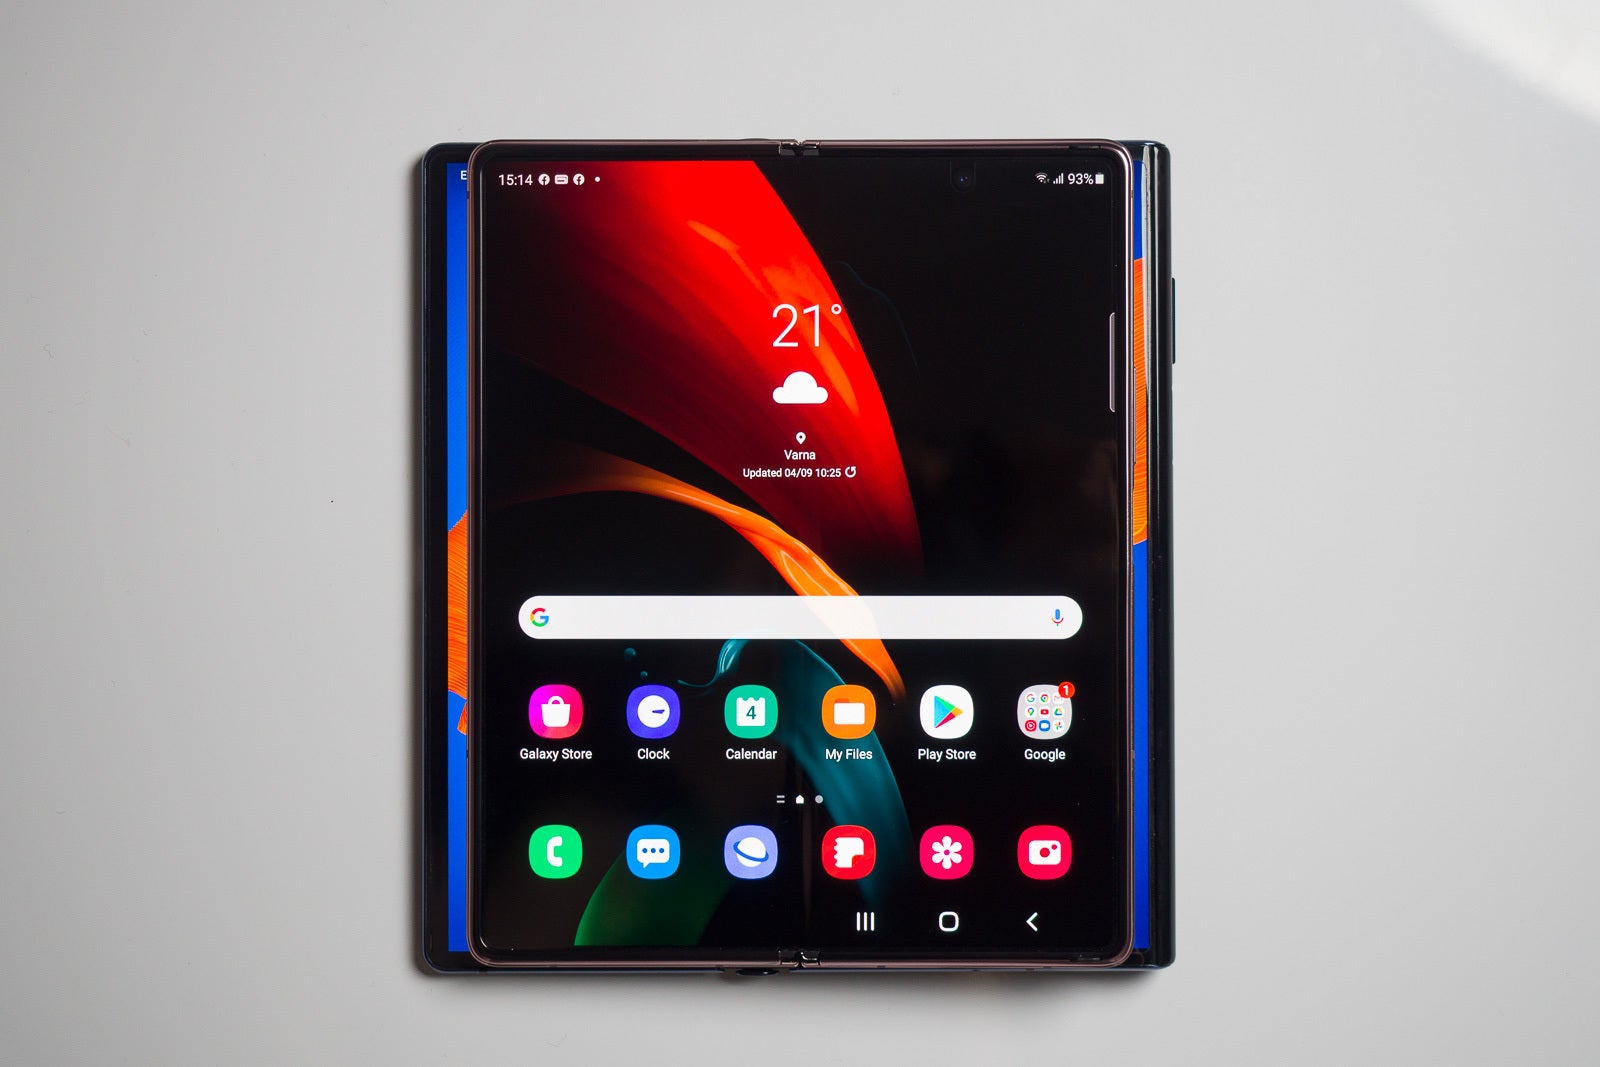 Samsung Galaxy Z Fold 2 vs Huawei Mate Xs: Which is the superior 5G foldable phone?